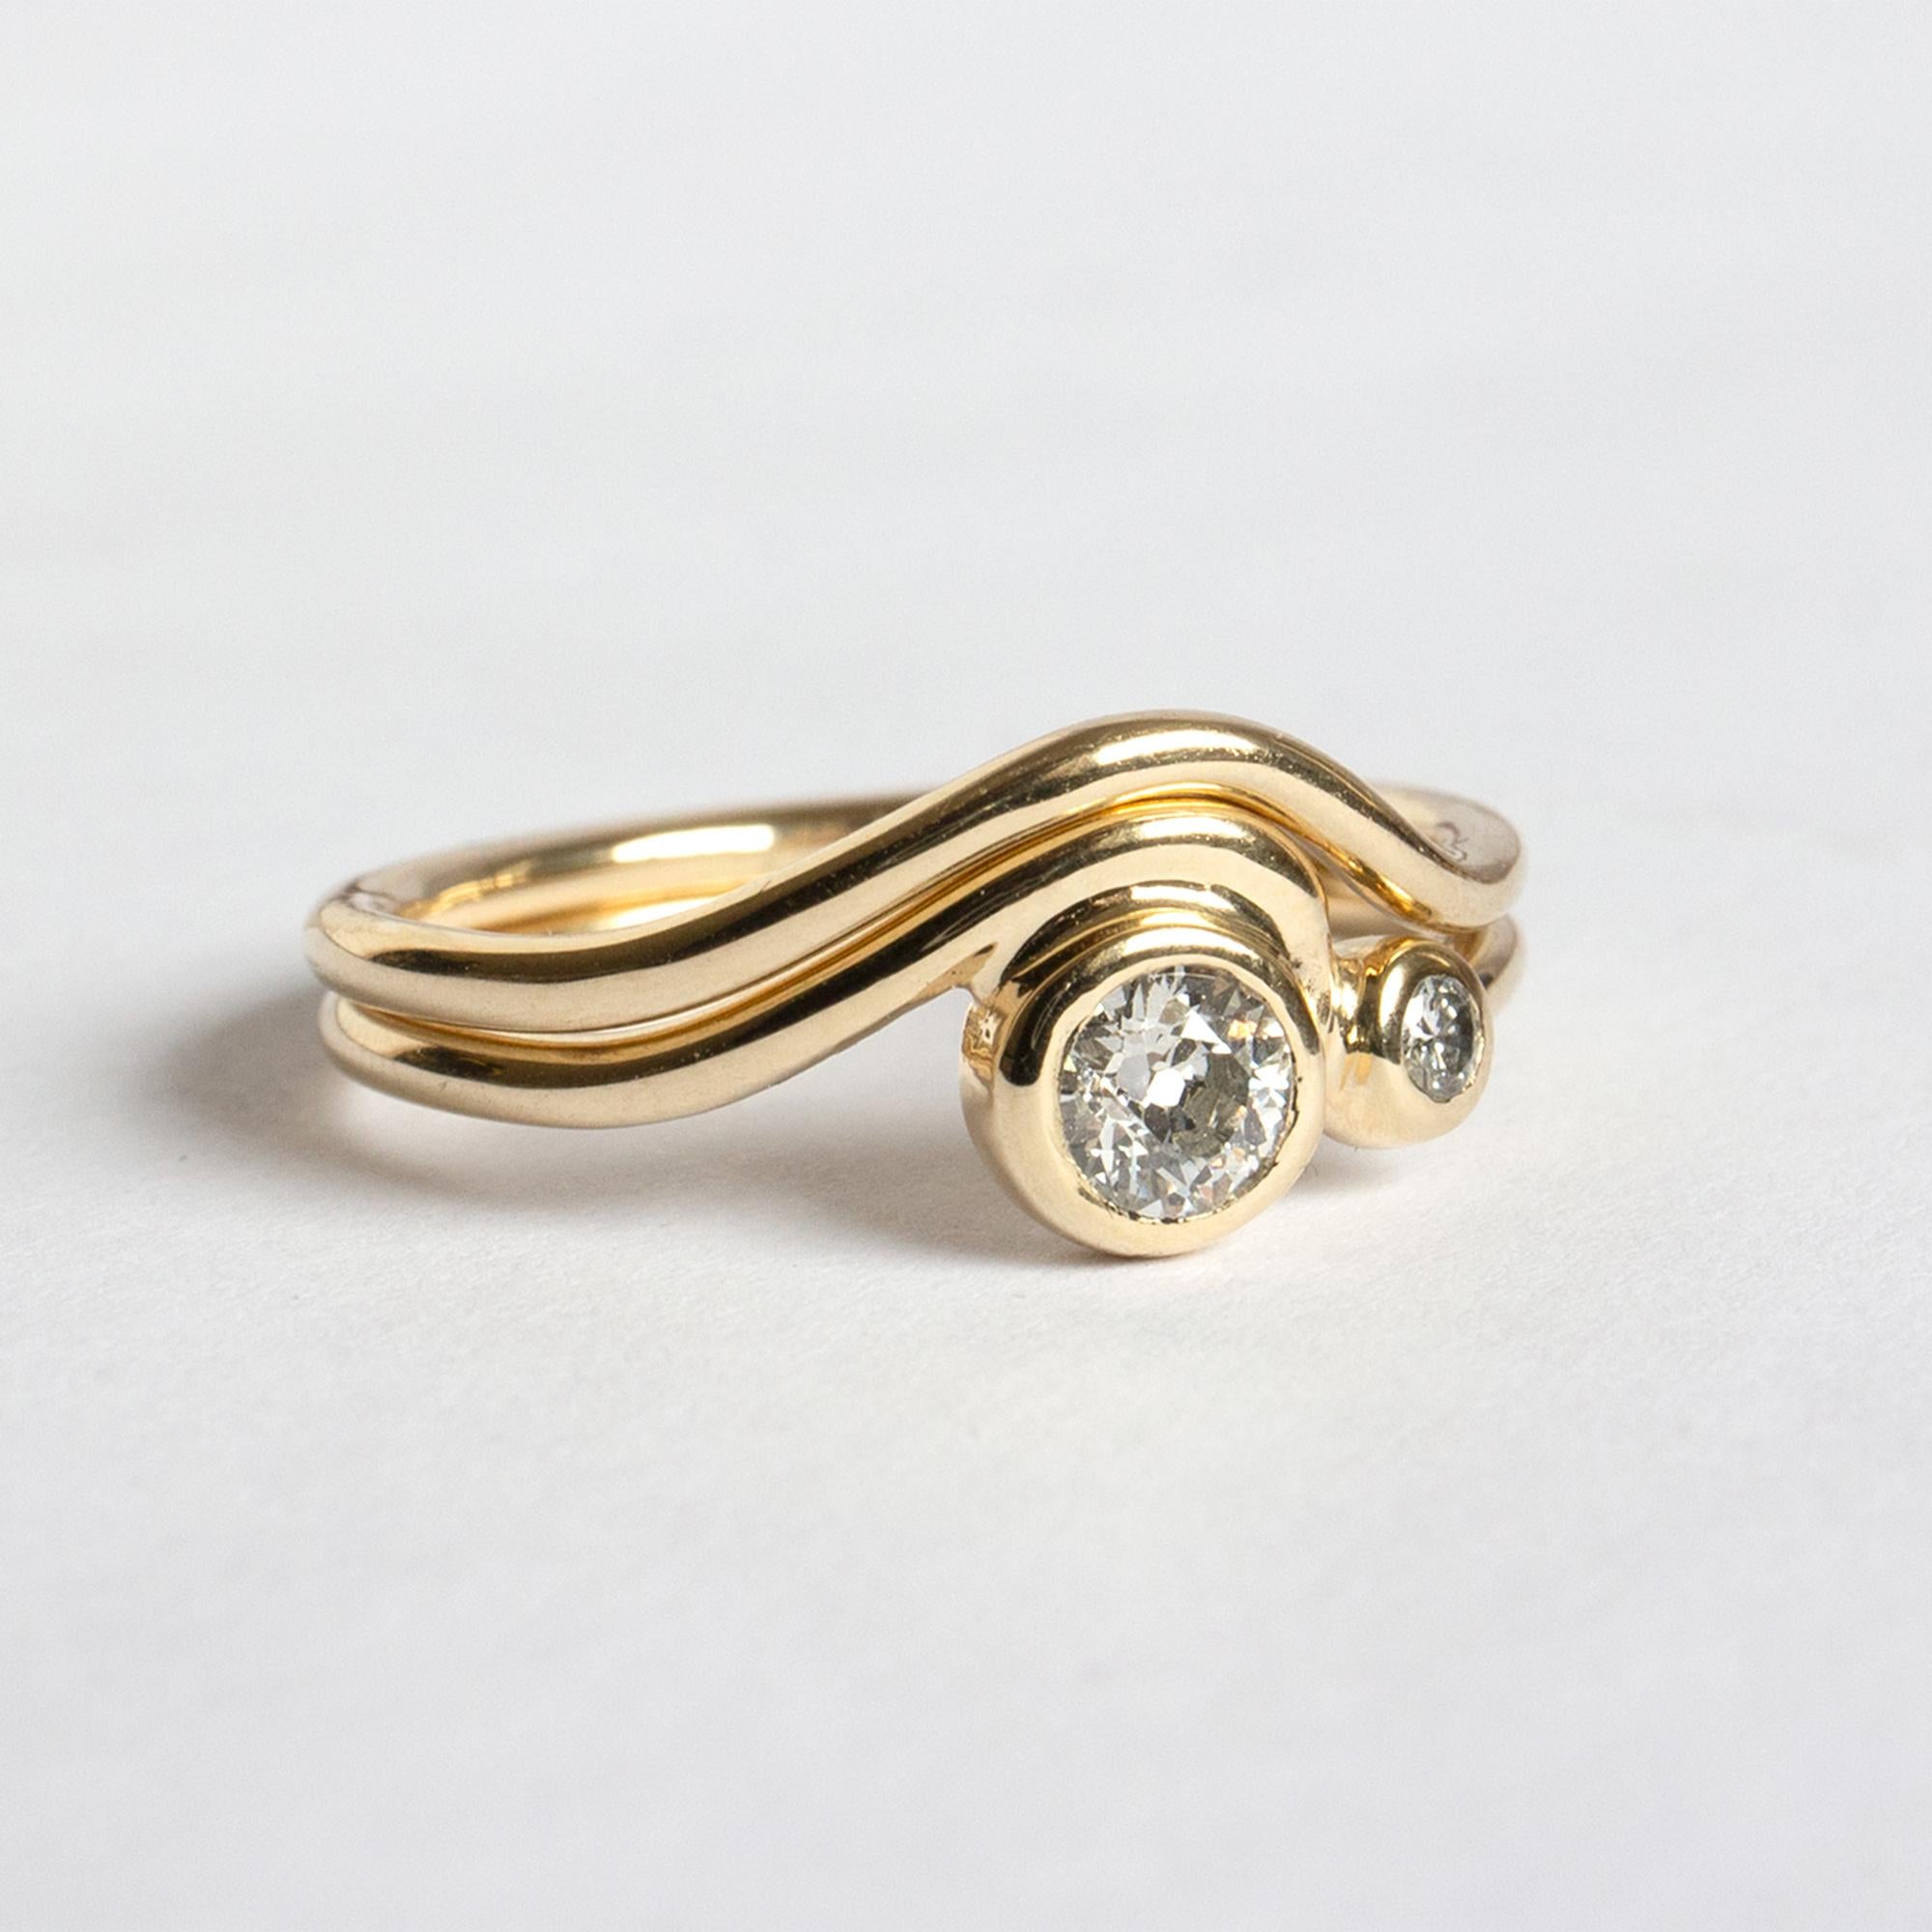 The fluid wave of the Masumi, now as delicate band. Nests perfectly alongside the 0.25ct and 0.5ct Diamond Masumi Rings, lovely alone or as a set.

READY TO SHIP IN 14K YELLOW GOLD OR 14K ROSE GOLD
INDICATE US RING SIZE VIA MESSAGE